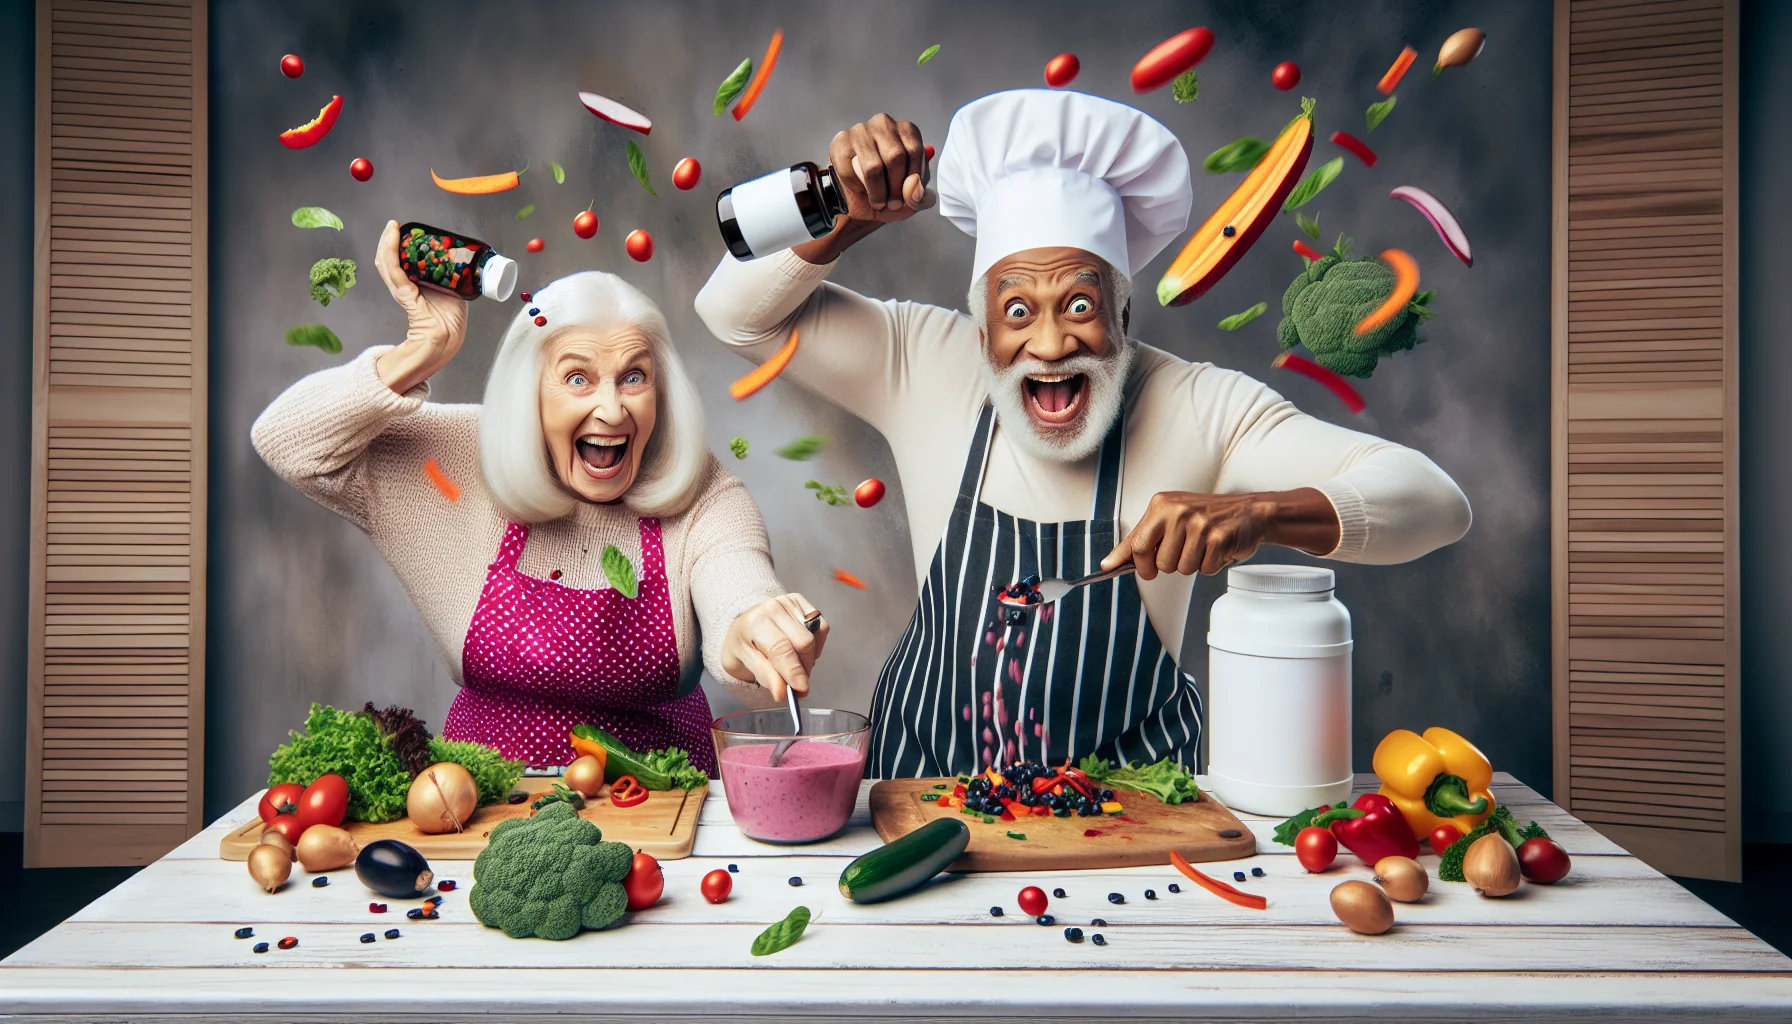 Picture an amusing and highly realistic scene: an elderly Caucasian woman and a senior Black man participating in a lively cooking competition. They each have a bottle of anti-aging supplements featuring prominently on their cooking stations. The old woman, adorned in a vibrant apron, is chopping colorful vegetables with an exaggerated flair, veggies flying, some even landing on the elderly man's table. The man, in a chef hat, is playfully dodging the flying veggies while blending a smoothie with his supplements, laughing at the absurdity. The focus is on the fun, energy, and vitality of aging with health and humor.